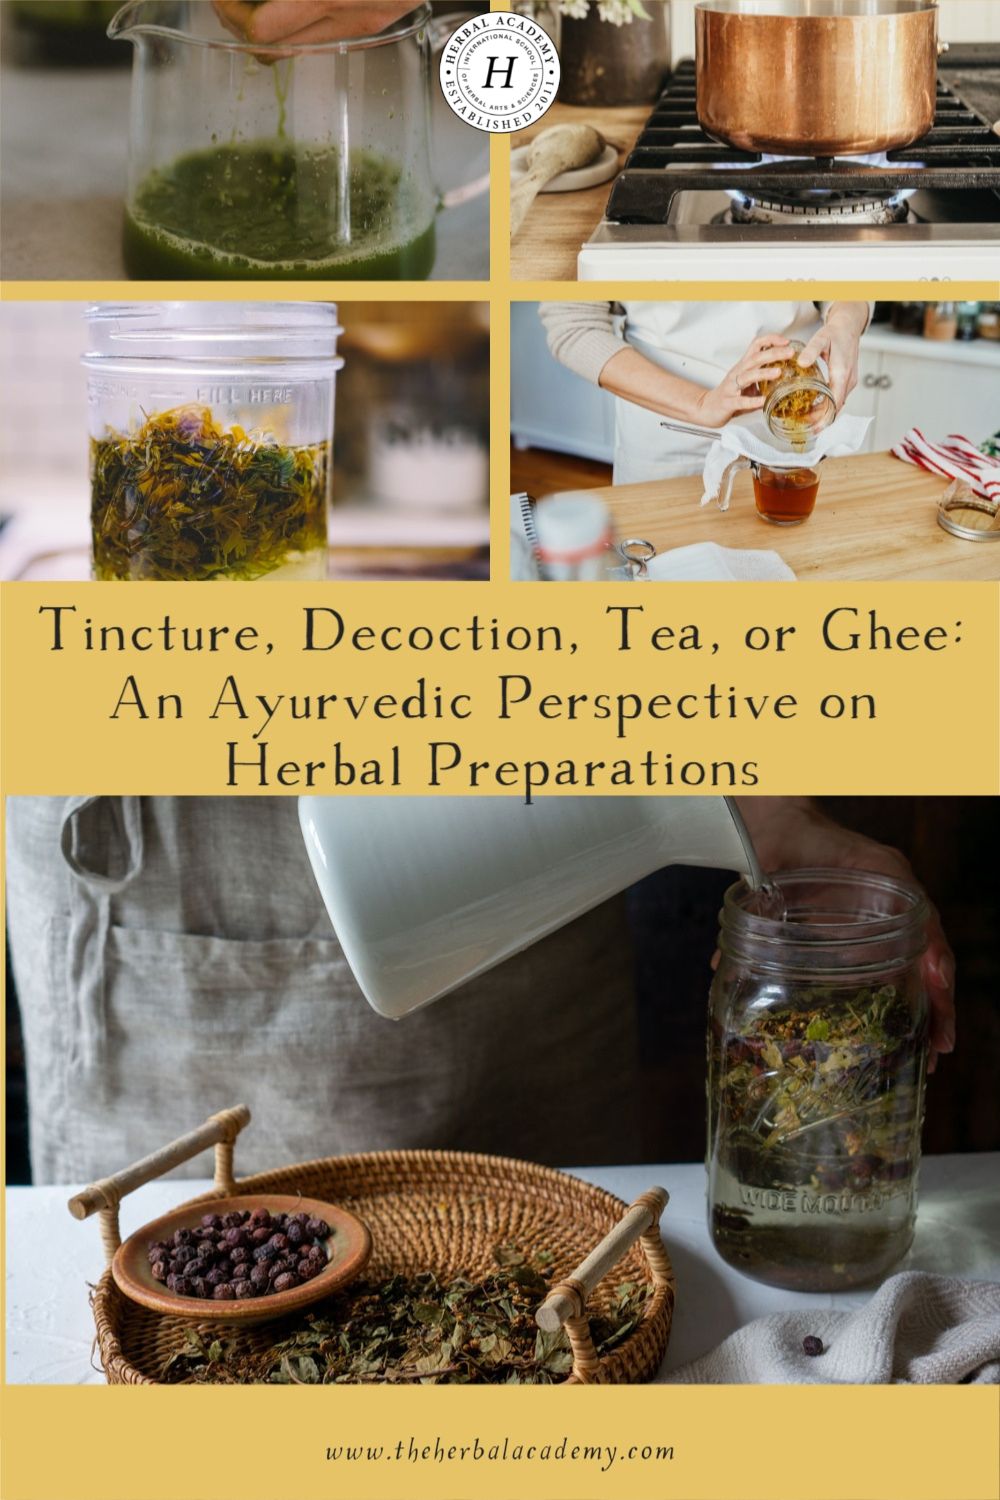 Tincture, Decoction, Tea, or Ghee: An Ayurvedic Perspective on Herbal Preparations | Herbal Academy | Here is an ayurvedic perspective on different types of herbal preparations, and some reasons why you may choose one preparation over another.